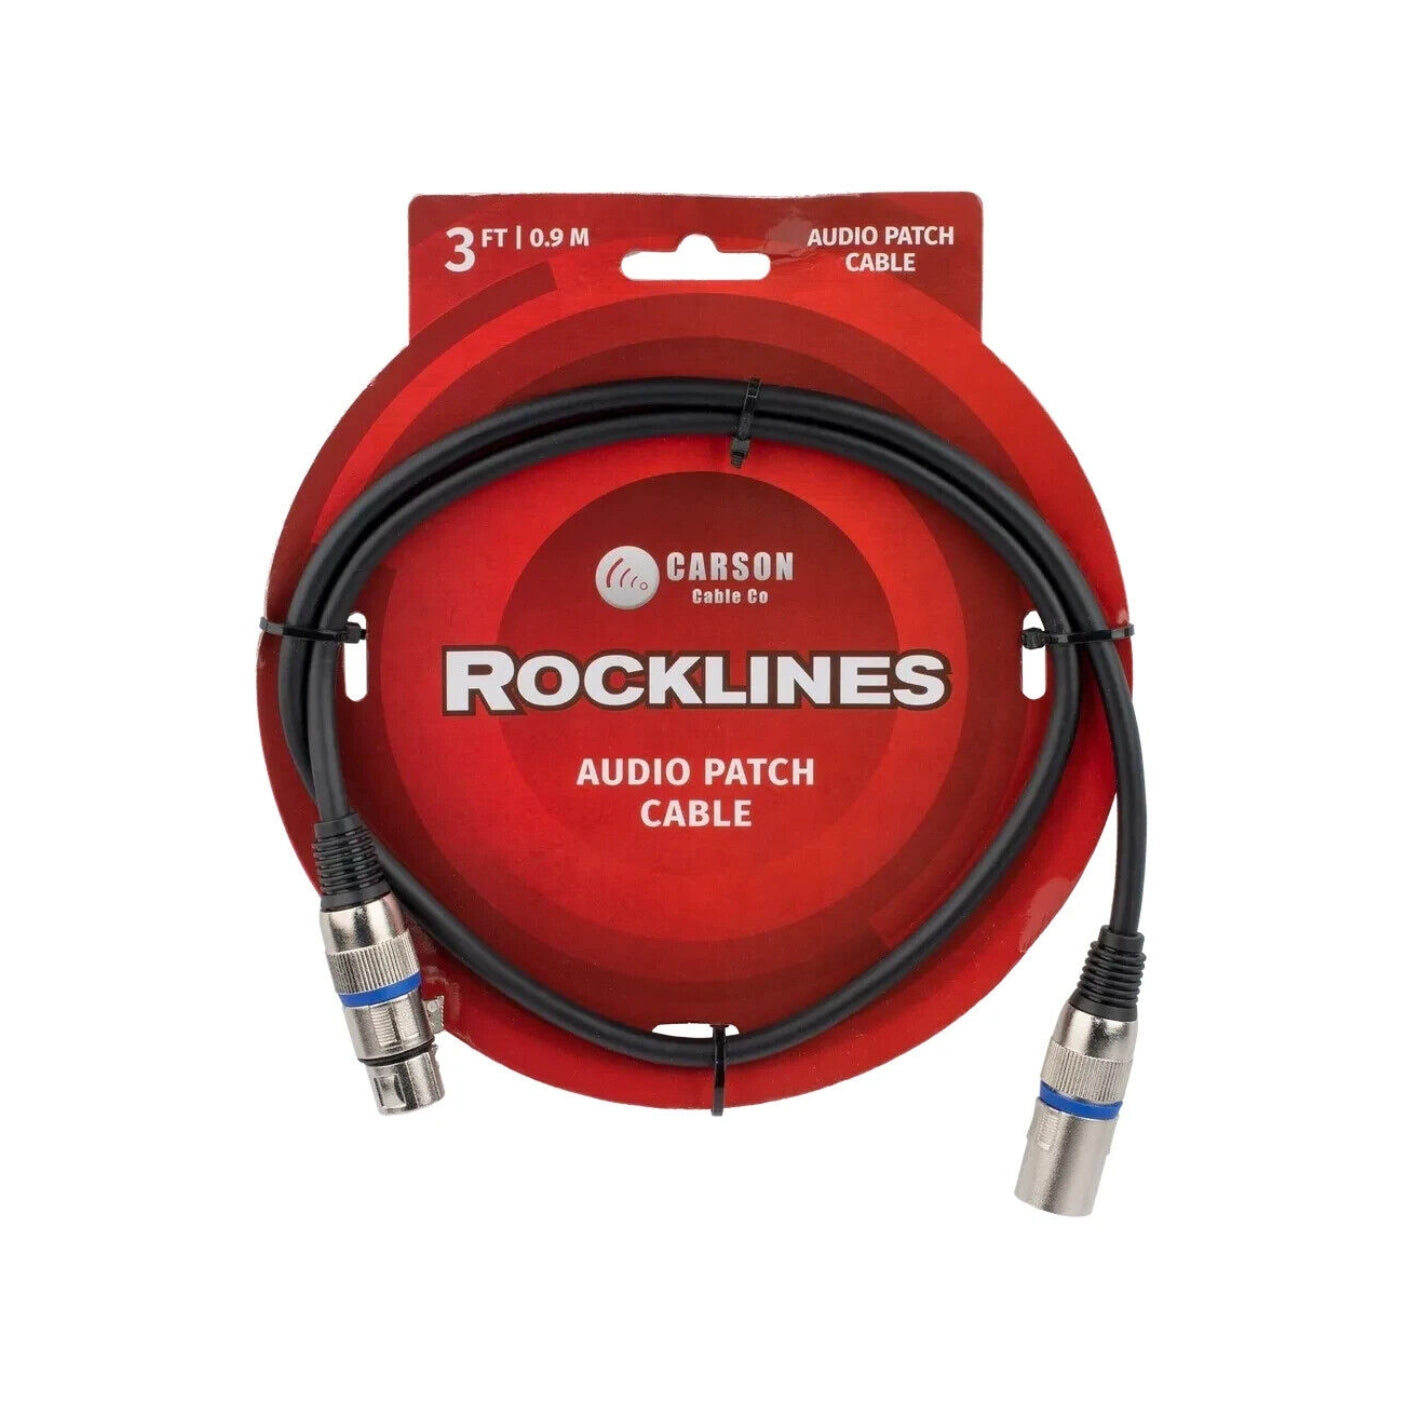 Carson Rocklines - XLR (F) to XLR (M) - Audio Patch Cable 3ft